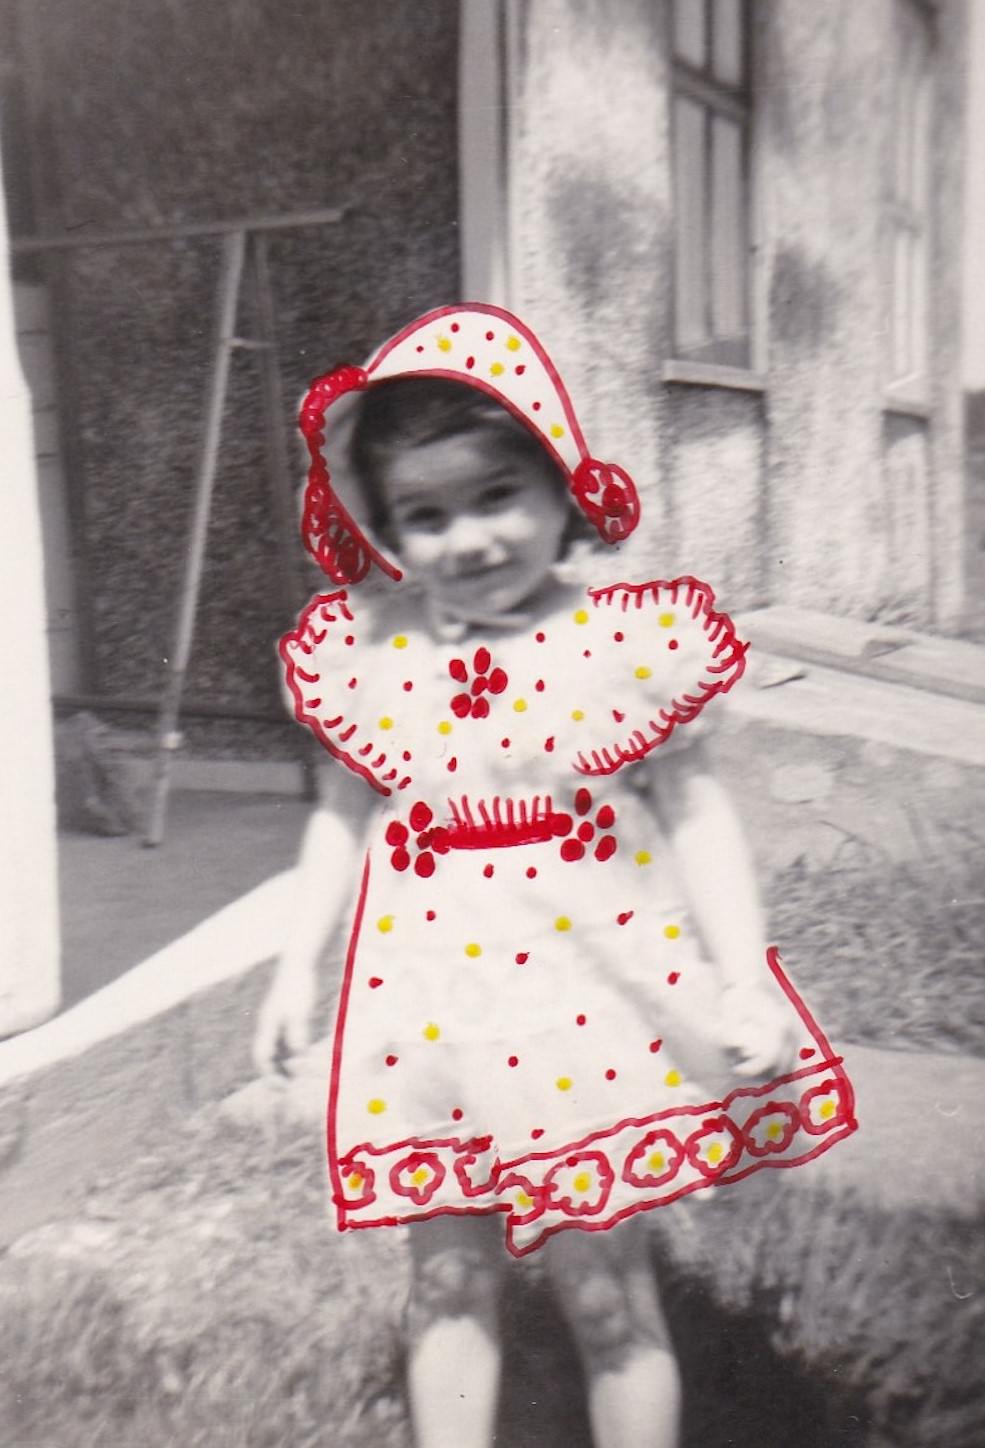 24 Cute and Adorable Vintage Photos from the Past that will Brighten Your Day